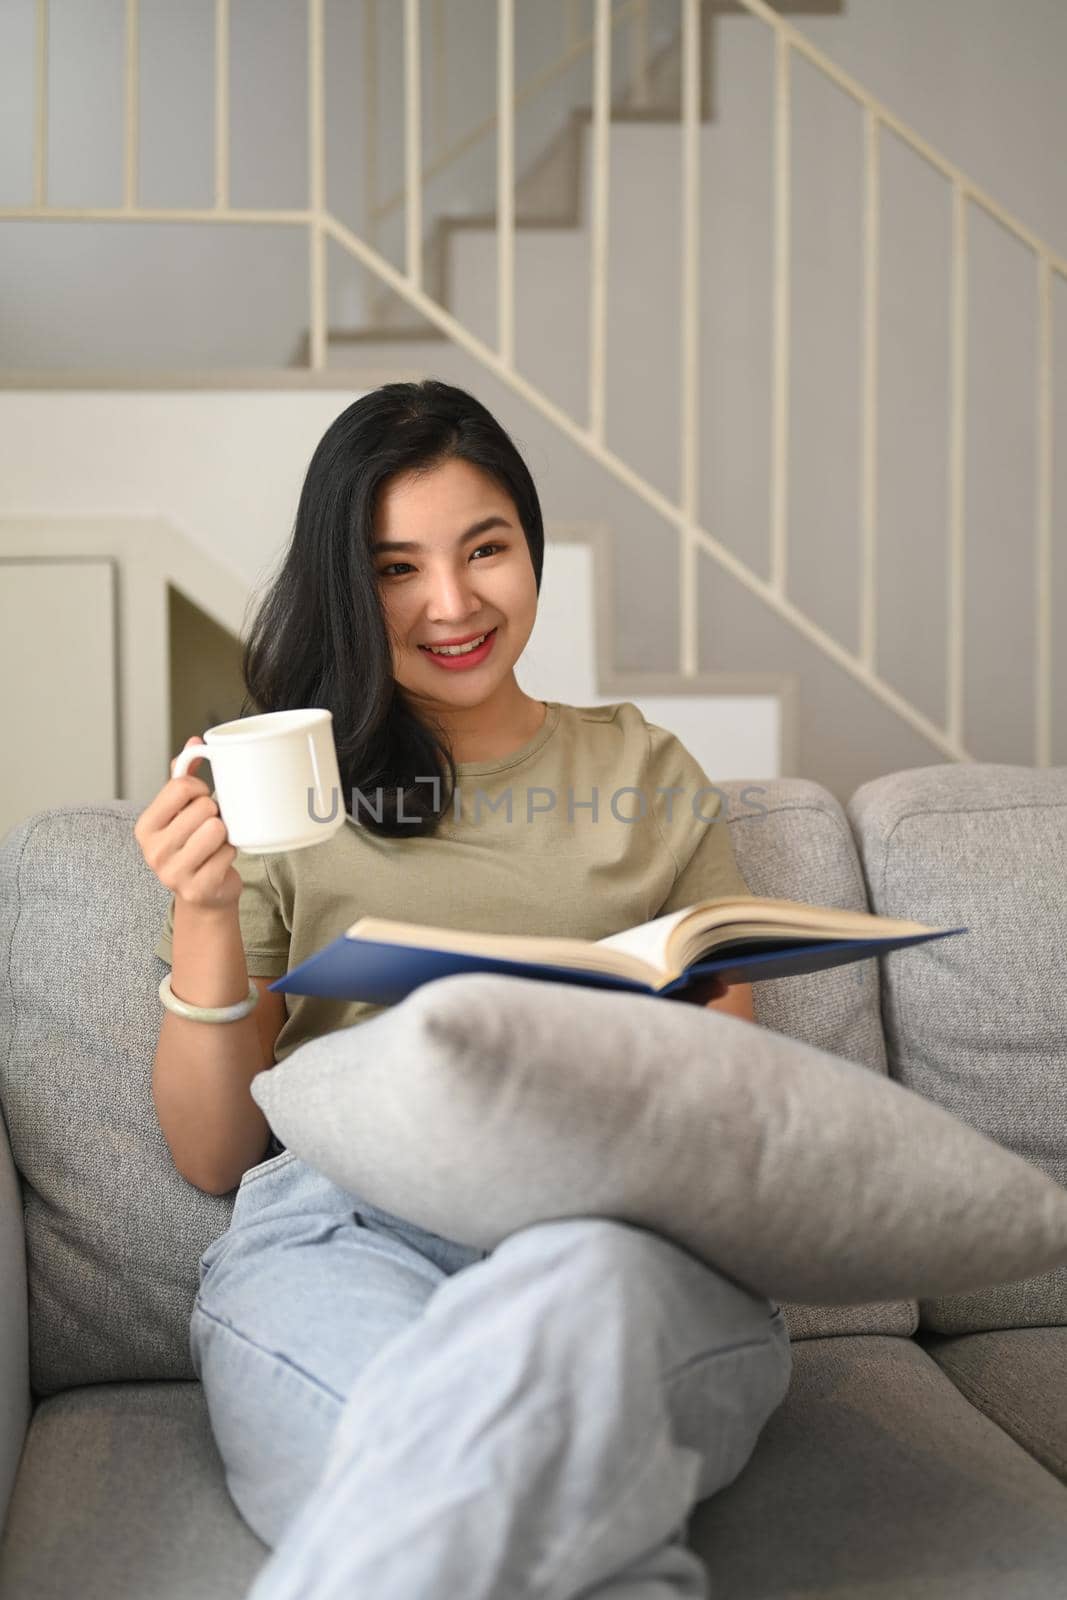 Smiling young woman drinking coffee and reading book on couch, spending leisure weekend at home.